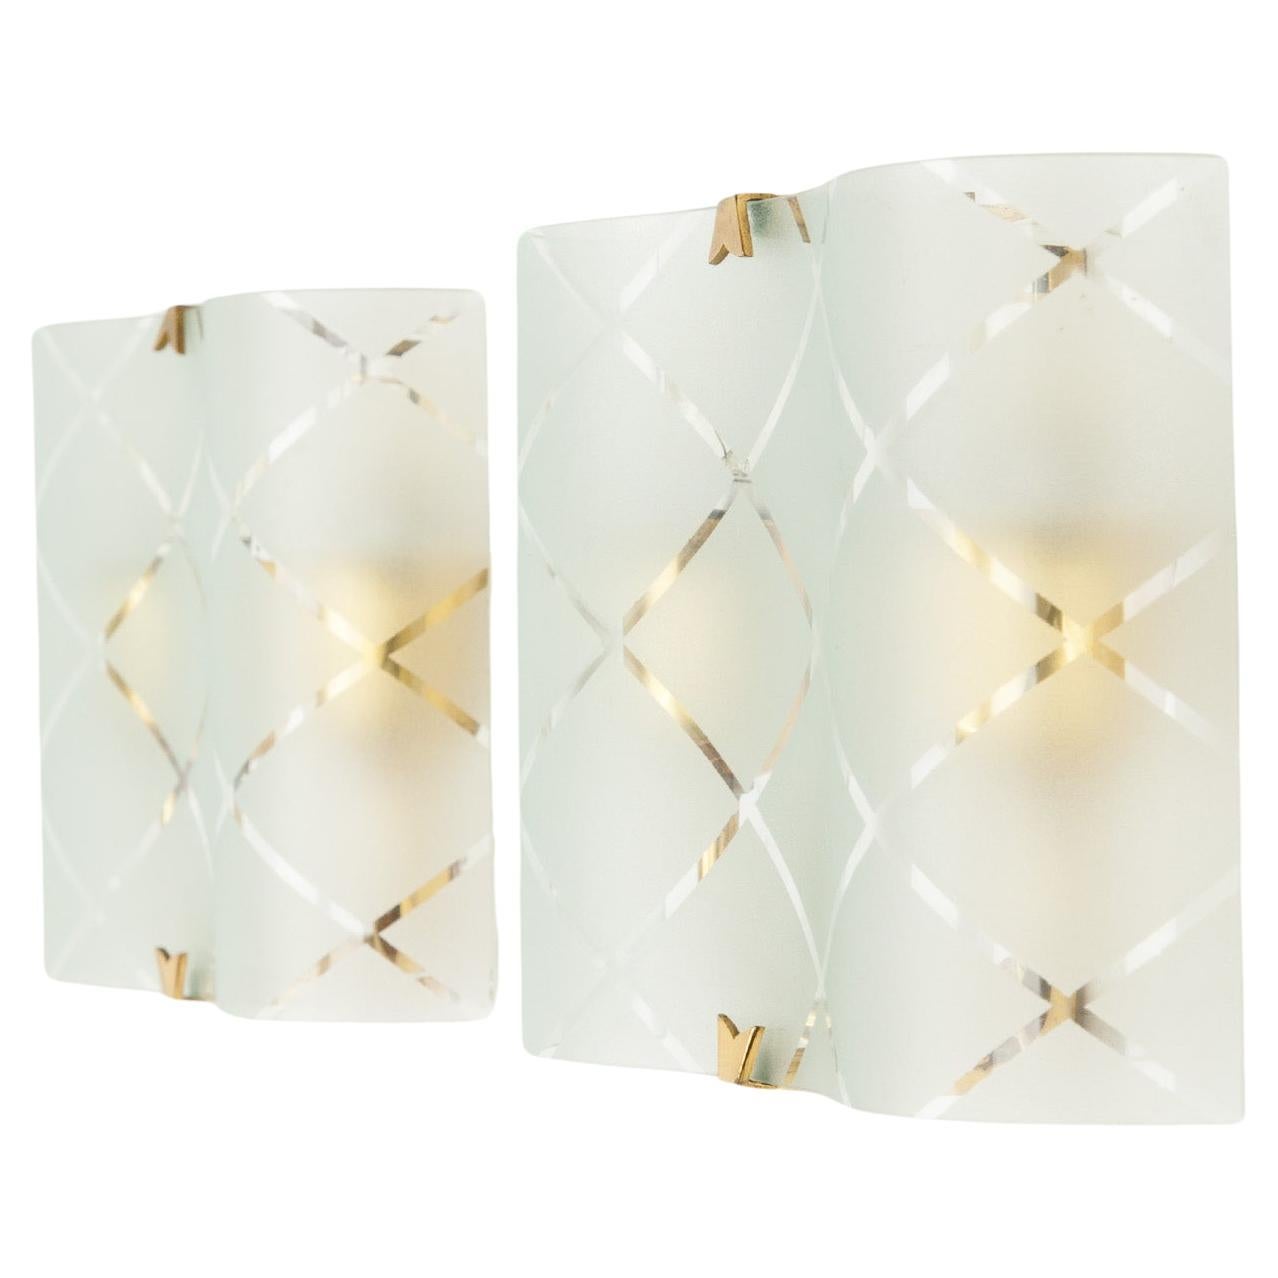 A lovely and elegant pair of modernist glass wall lights with brass details. The soft wavy glass, with an etched diagonal pattern, is held by a curved brass bracket. Beautiful Italian craftsmanship and attention to detail is visible throughout,